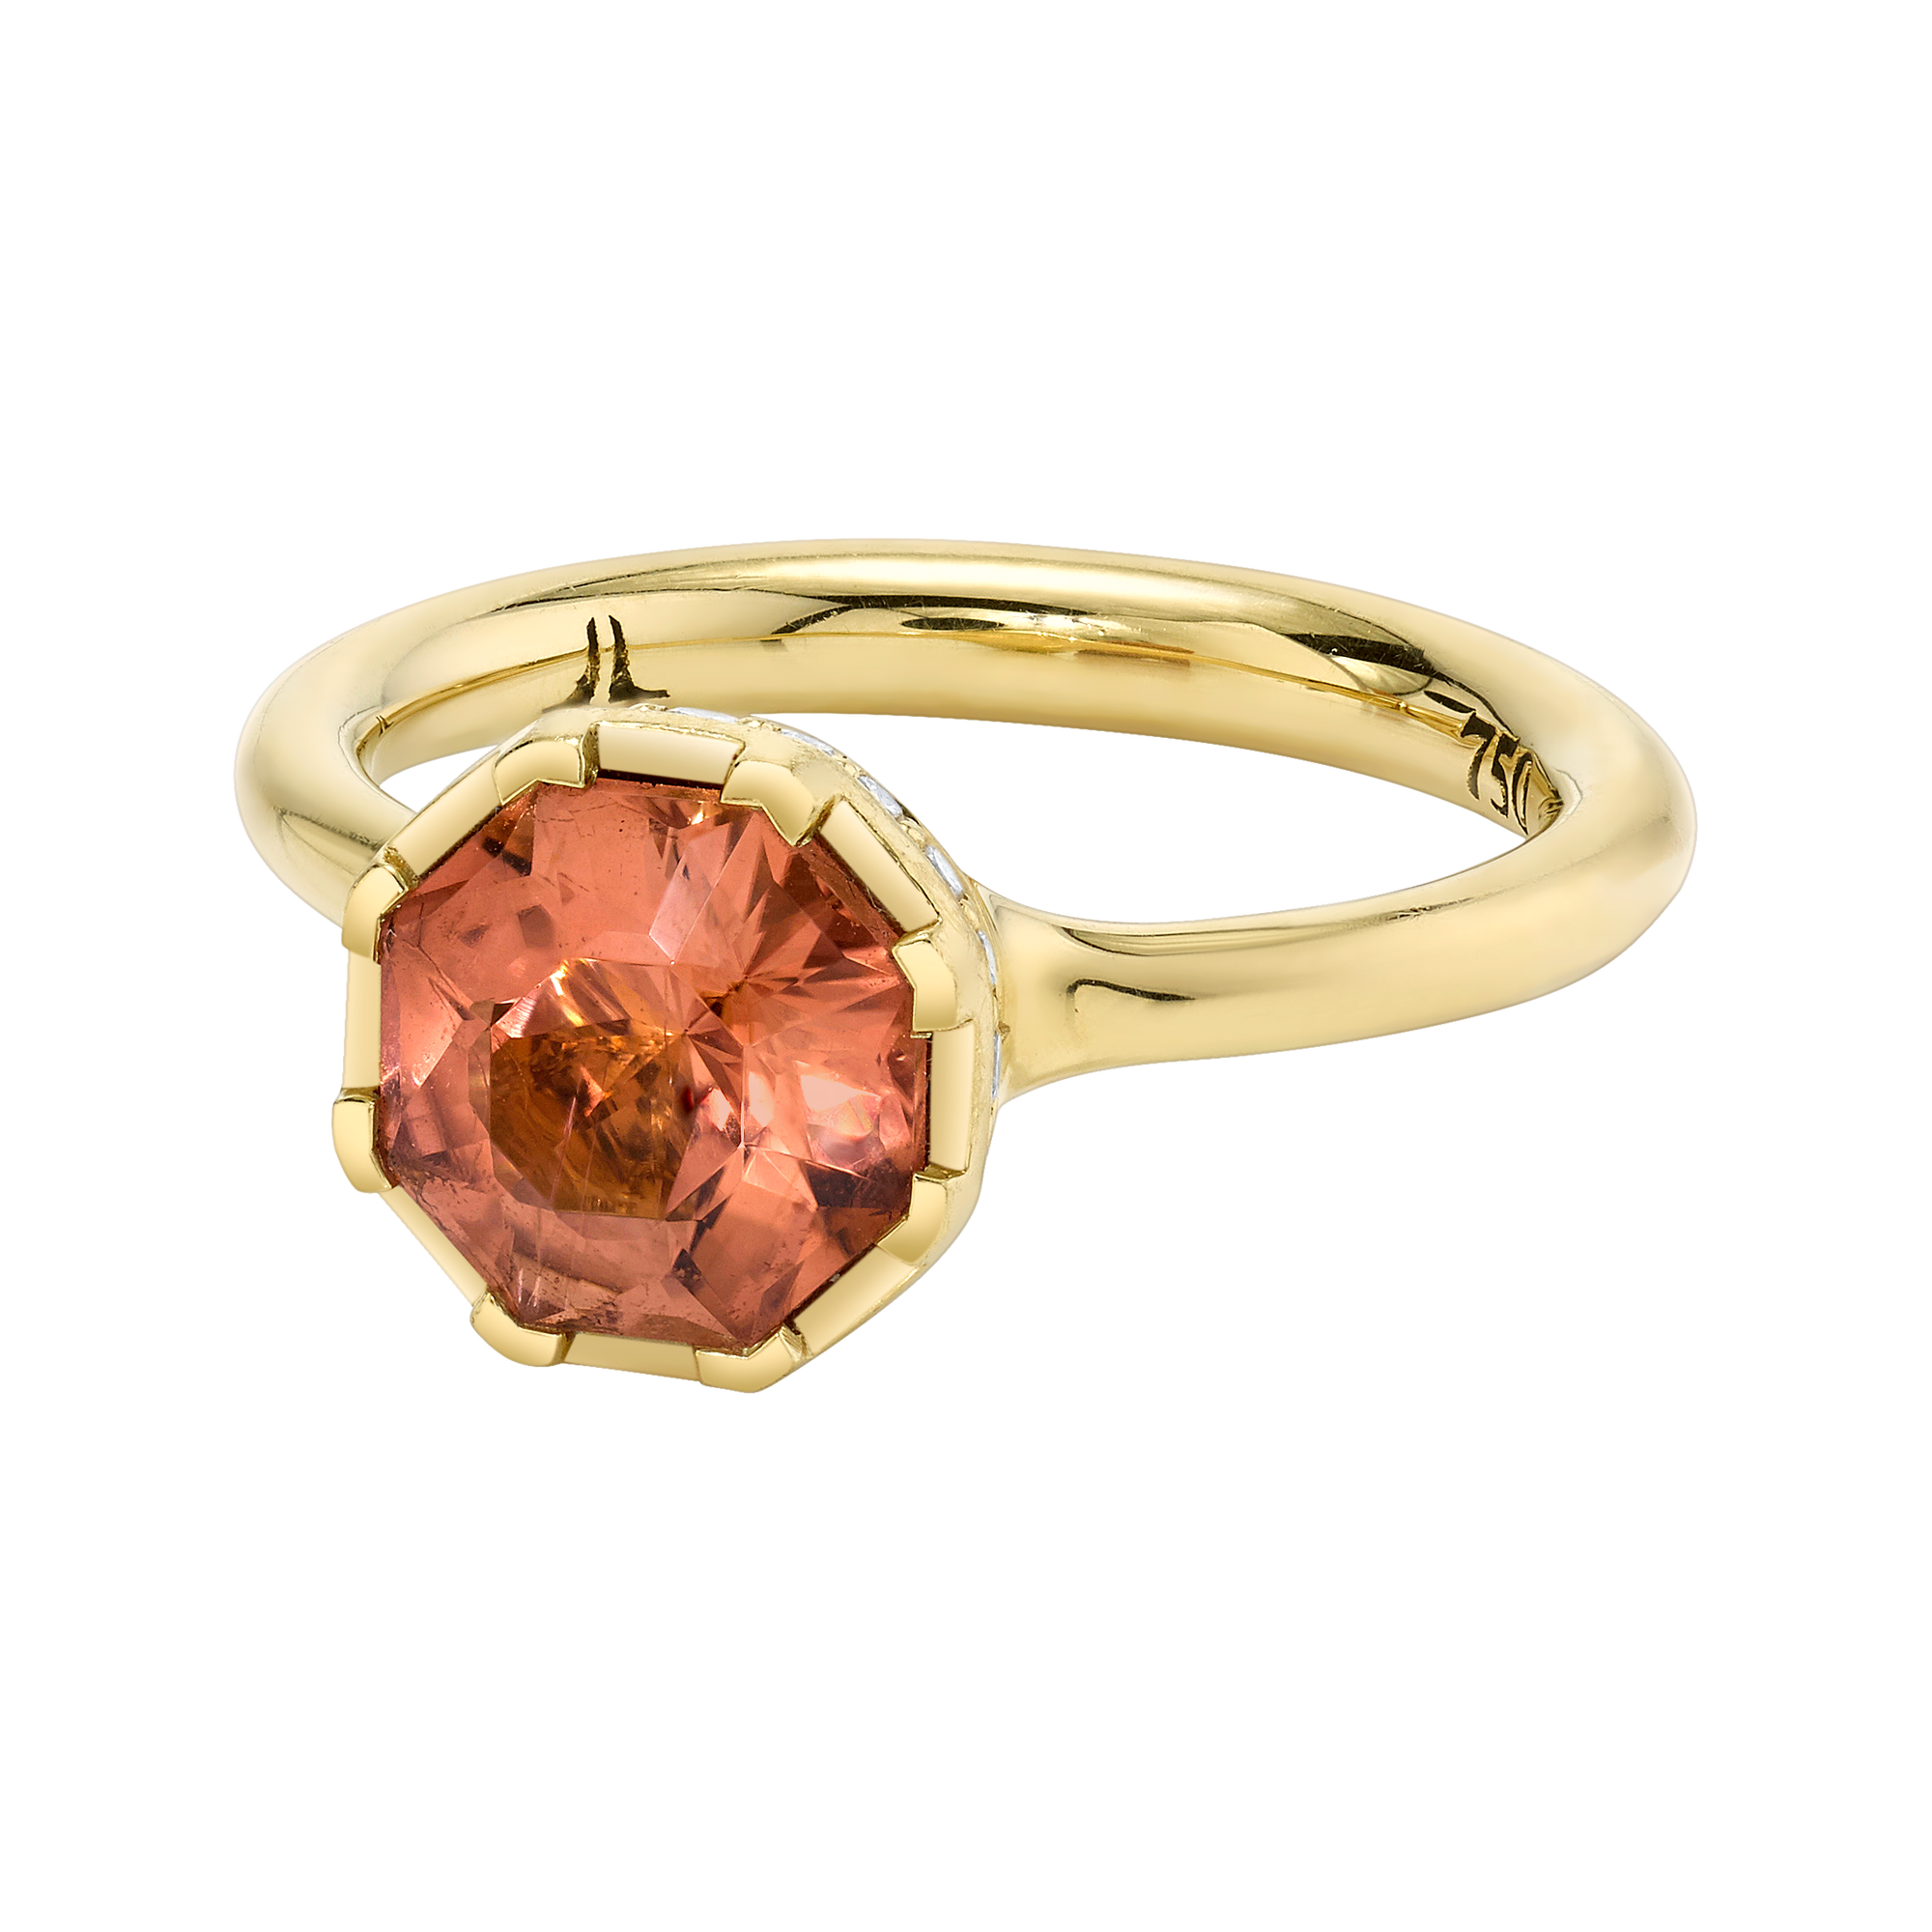 Sacred Shade Ring featuring a Precision-Cut Champagne Tourmaline with Diamond Pave